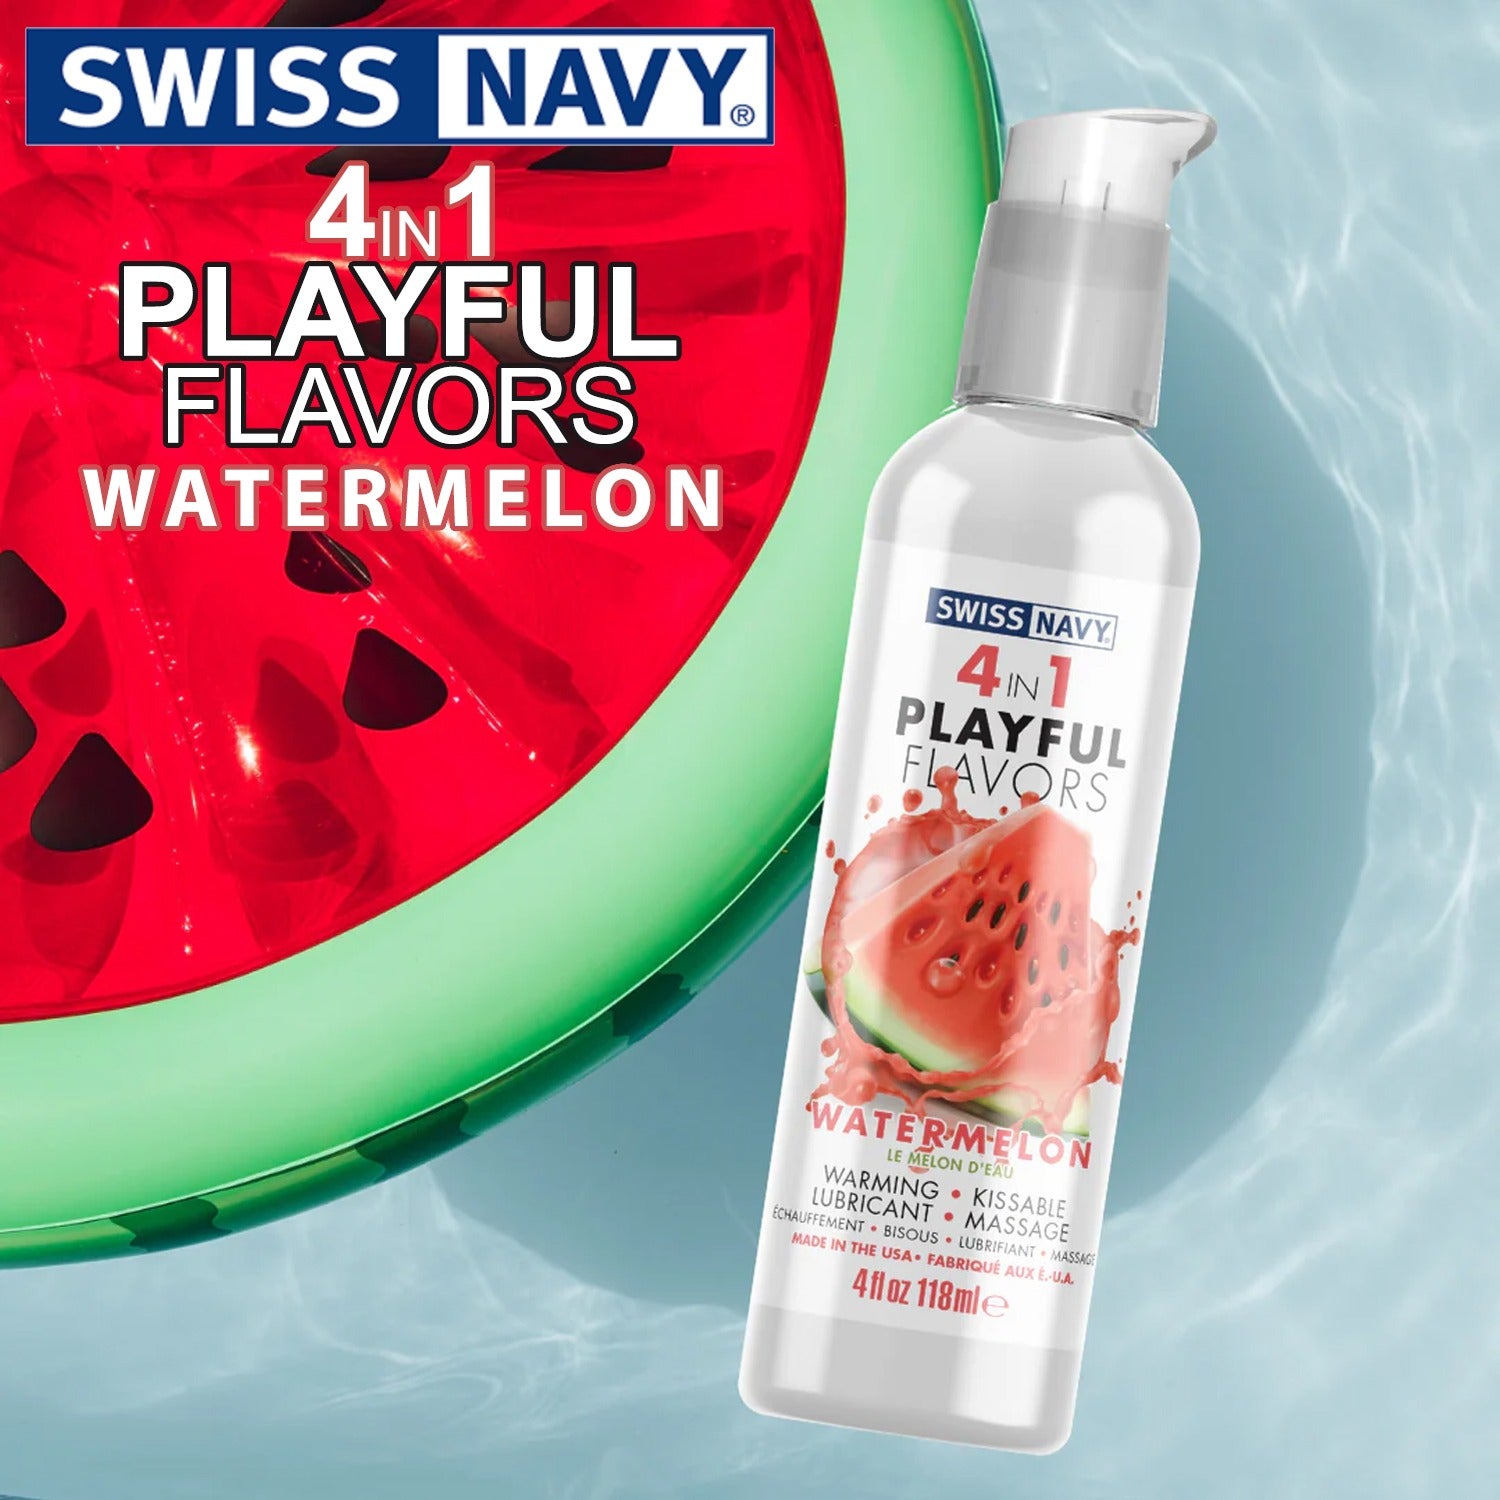 An illustrated image of a sliced open watermelon with a water in a swimming pool in the background, and a Swiss Navy 4 In 1 Playful Flavors Watermelon Warming, Kissable, Lubricant, Massage, Made in the USA 4 fl oz 118 ml bottle. On the top left is the Swiss Navy logo, product name: 4 In 1 Playful Flavors Watermelon, and on the bottom right "Available at Playbay.ca".